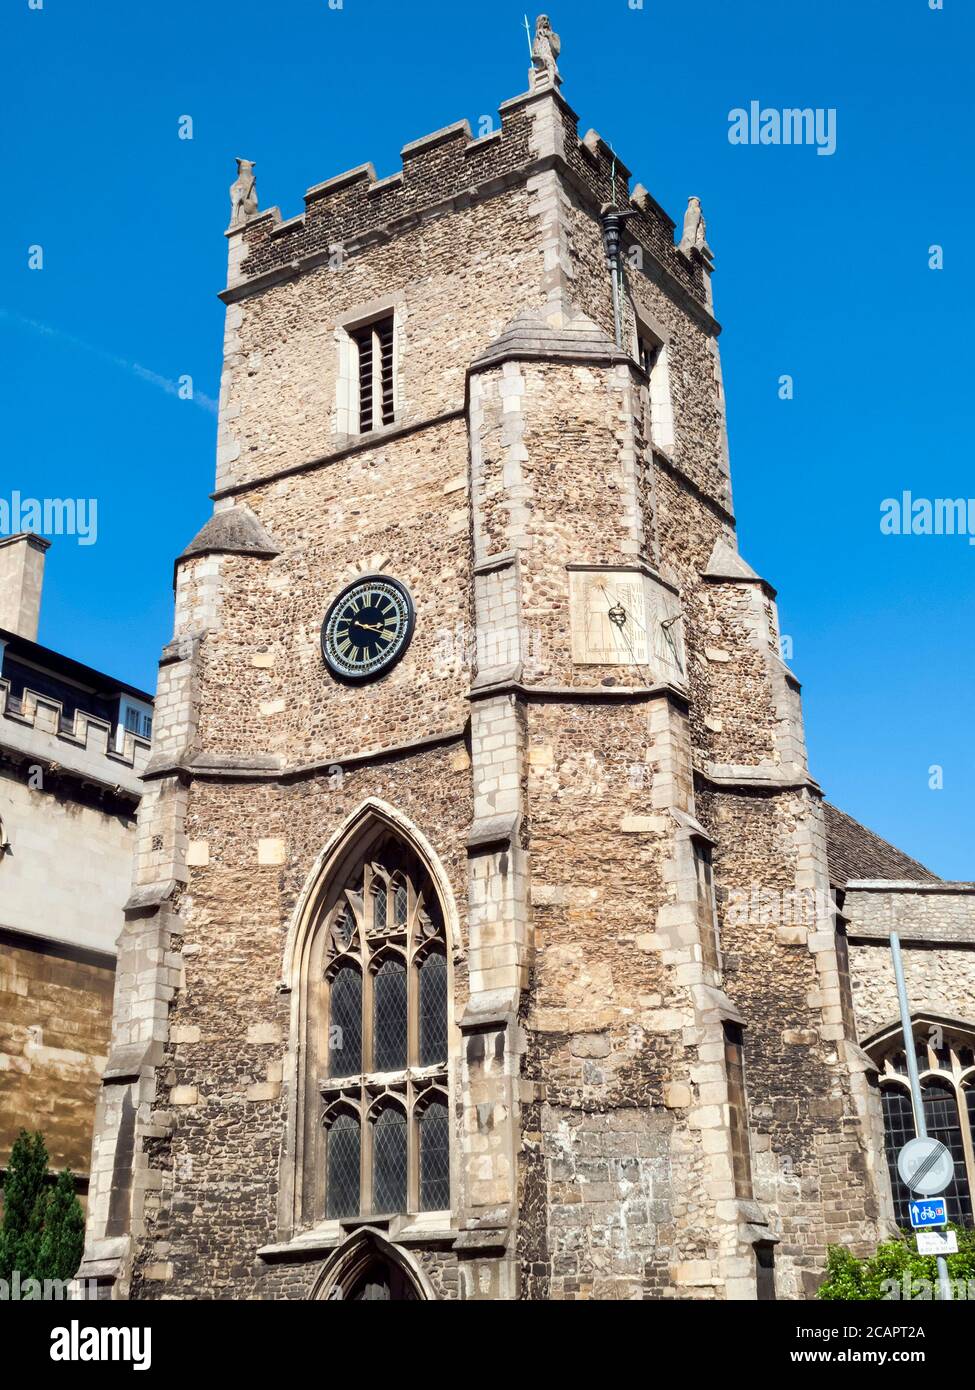 St Botolph's Parish Church Cambridge Cambridgeshie England UK built around 1350 and dedicated to the patron saint of travellers which is a popular tou Stock Photo